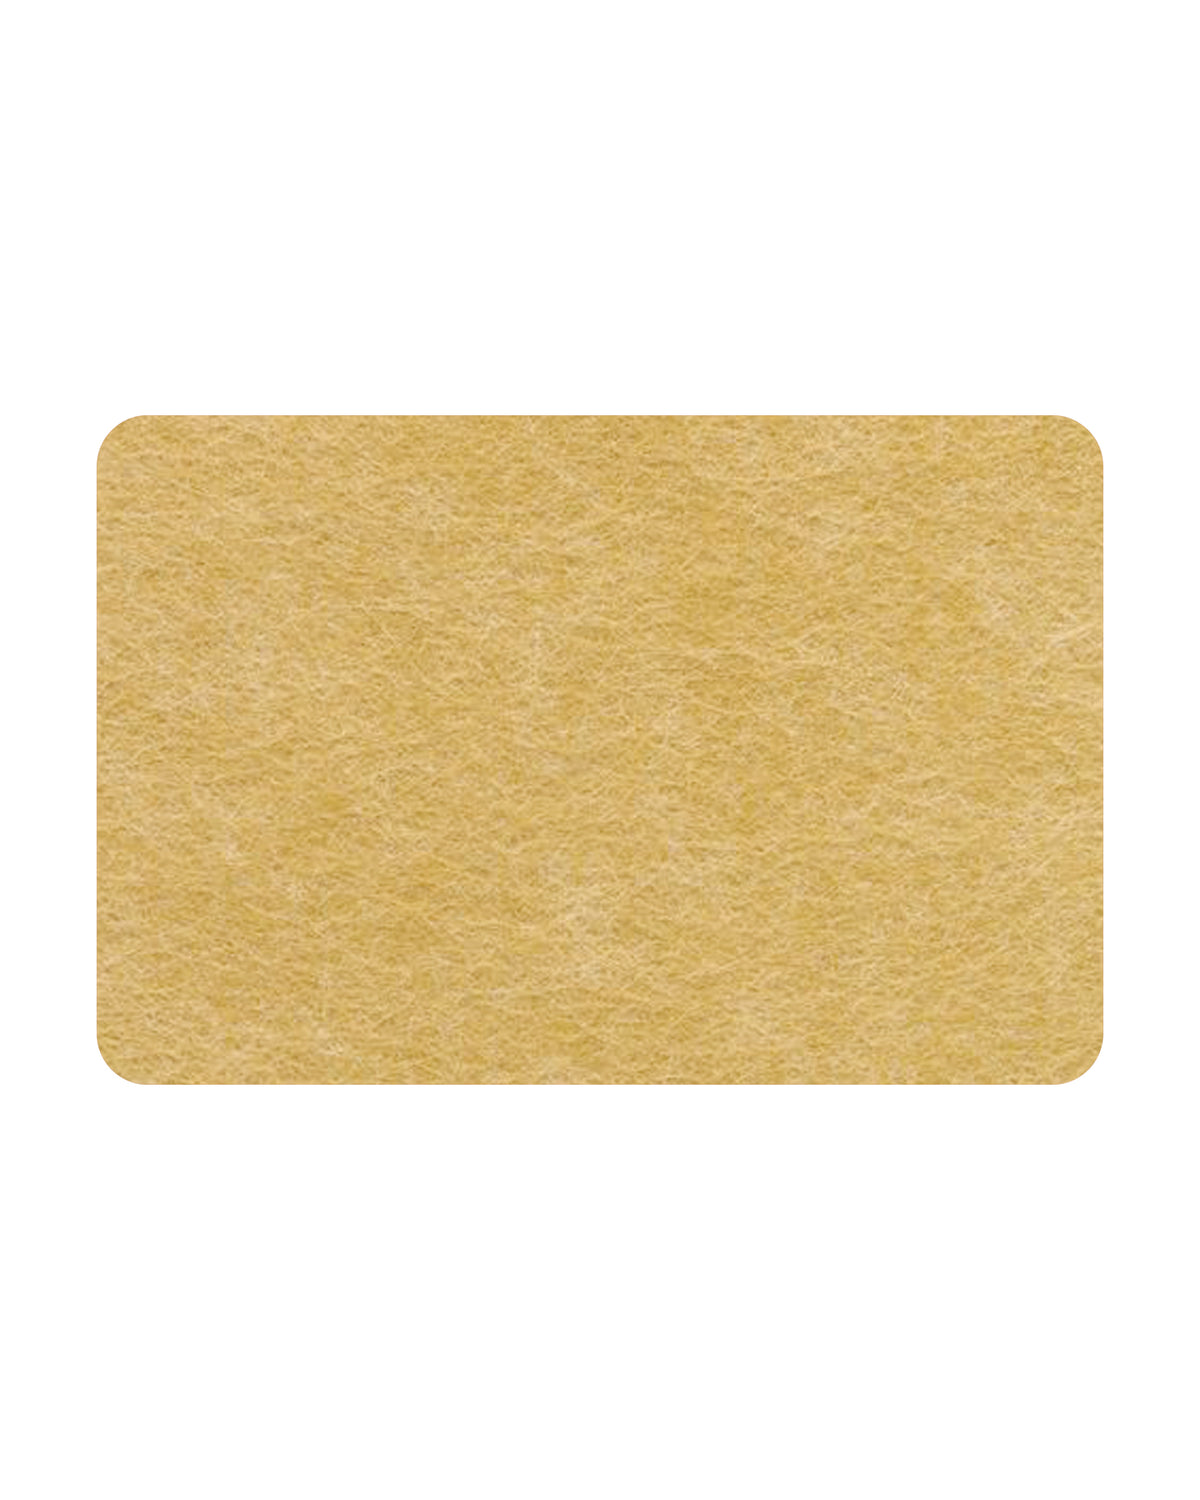 CURVED RECTANGLE PINBOARD